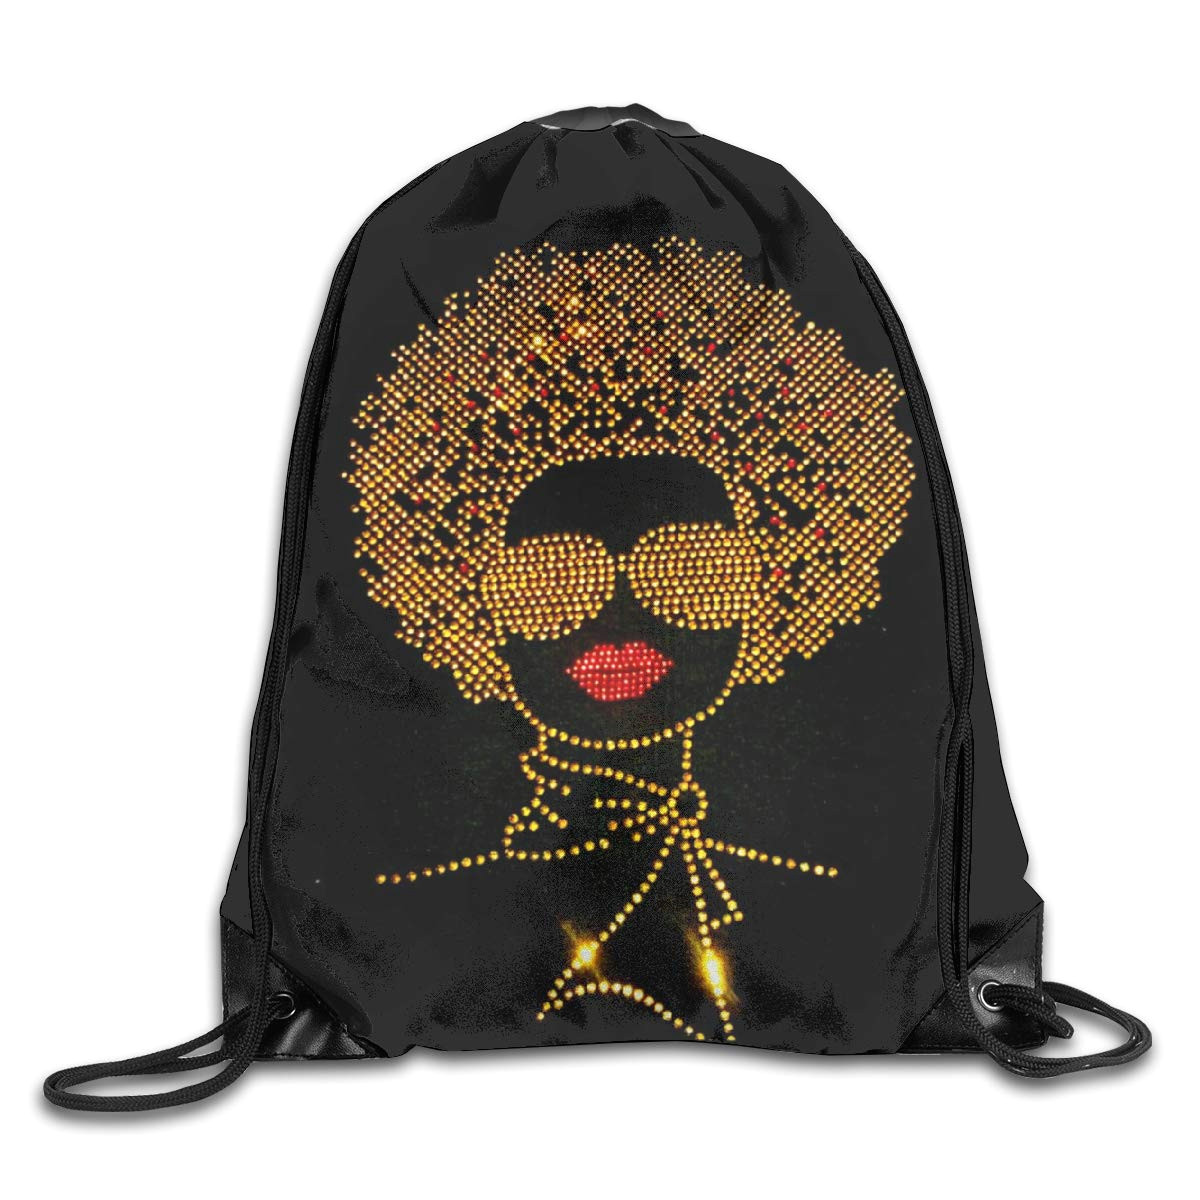 How to Draw A Backpack Step by Step Easy Amazon Com Afro Gold Bling Blonde Patterned themed Printed